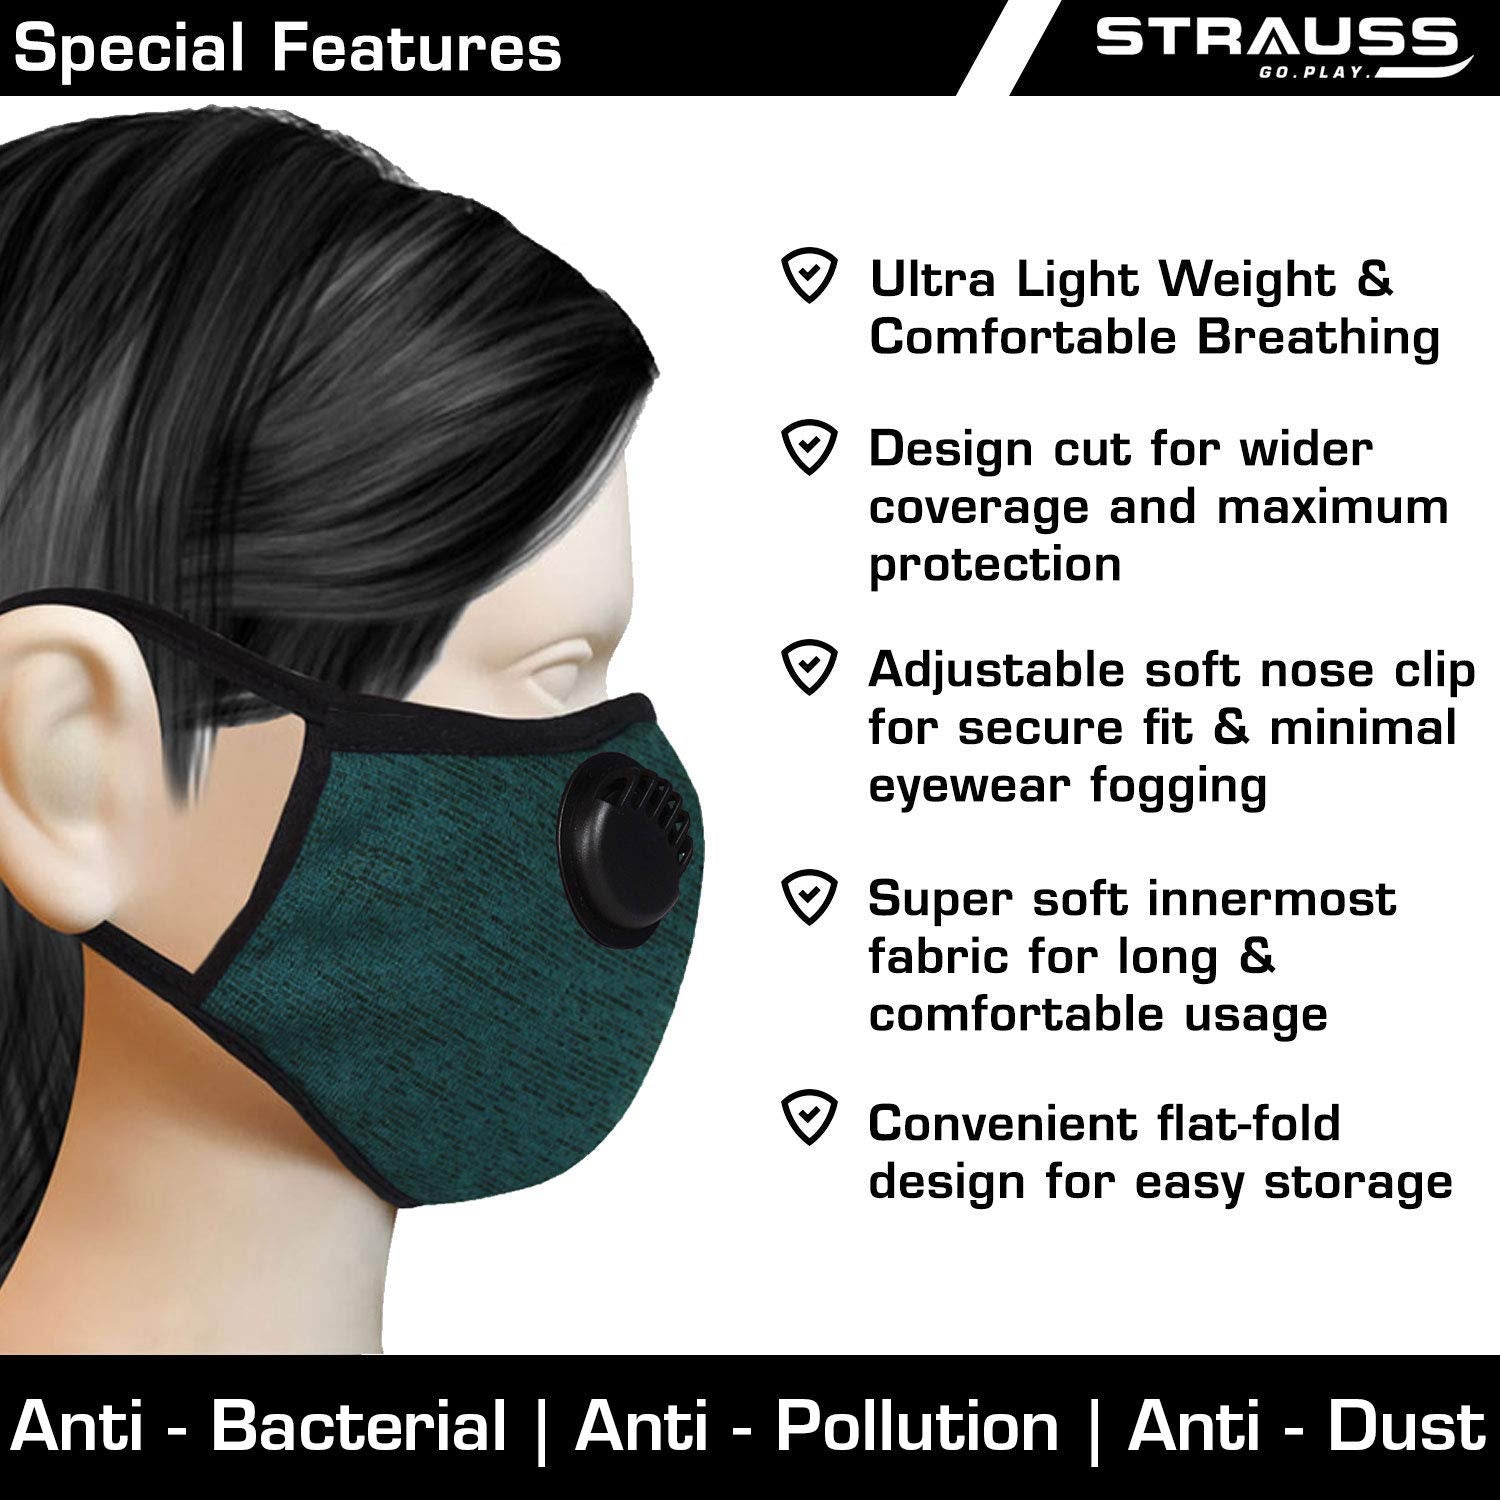 STRAUSS Unisex Anti-Bacterial Protection Mask, Non Vent, Small, (Grey)